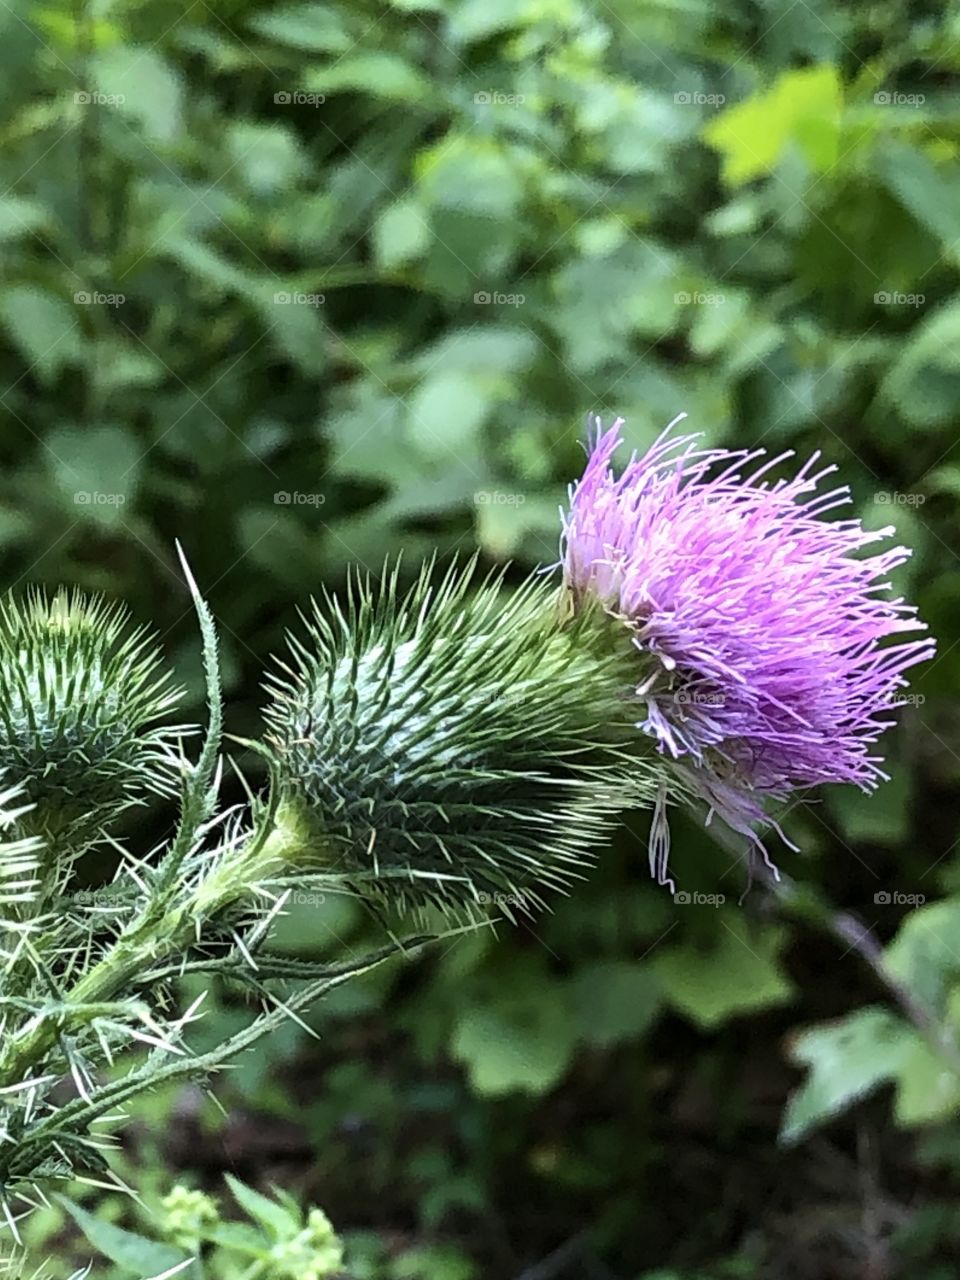 Thistle plant with purple bloom.